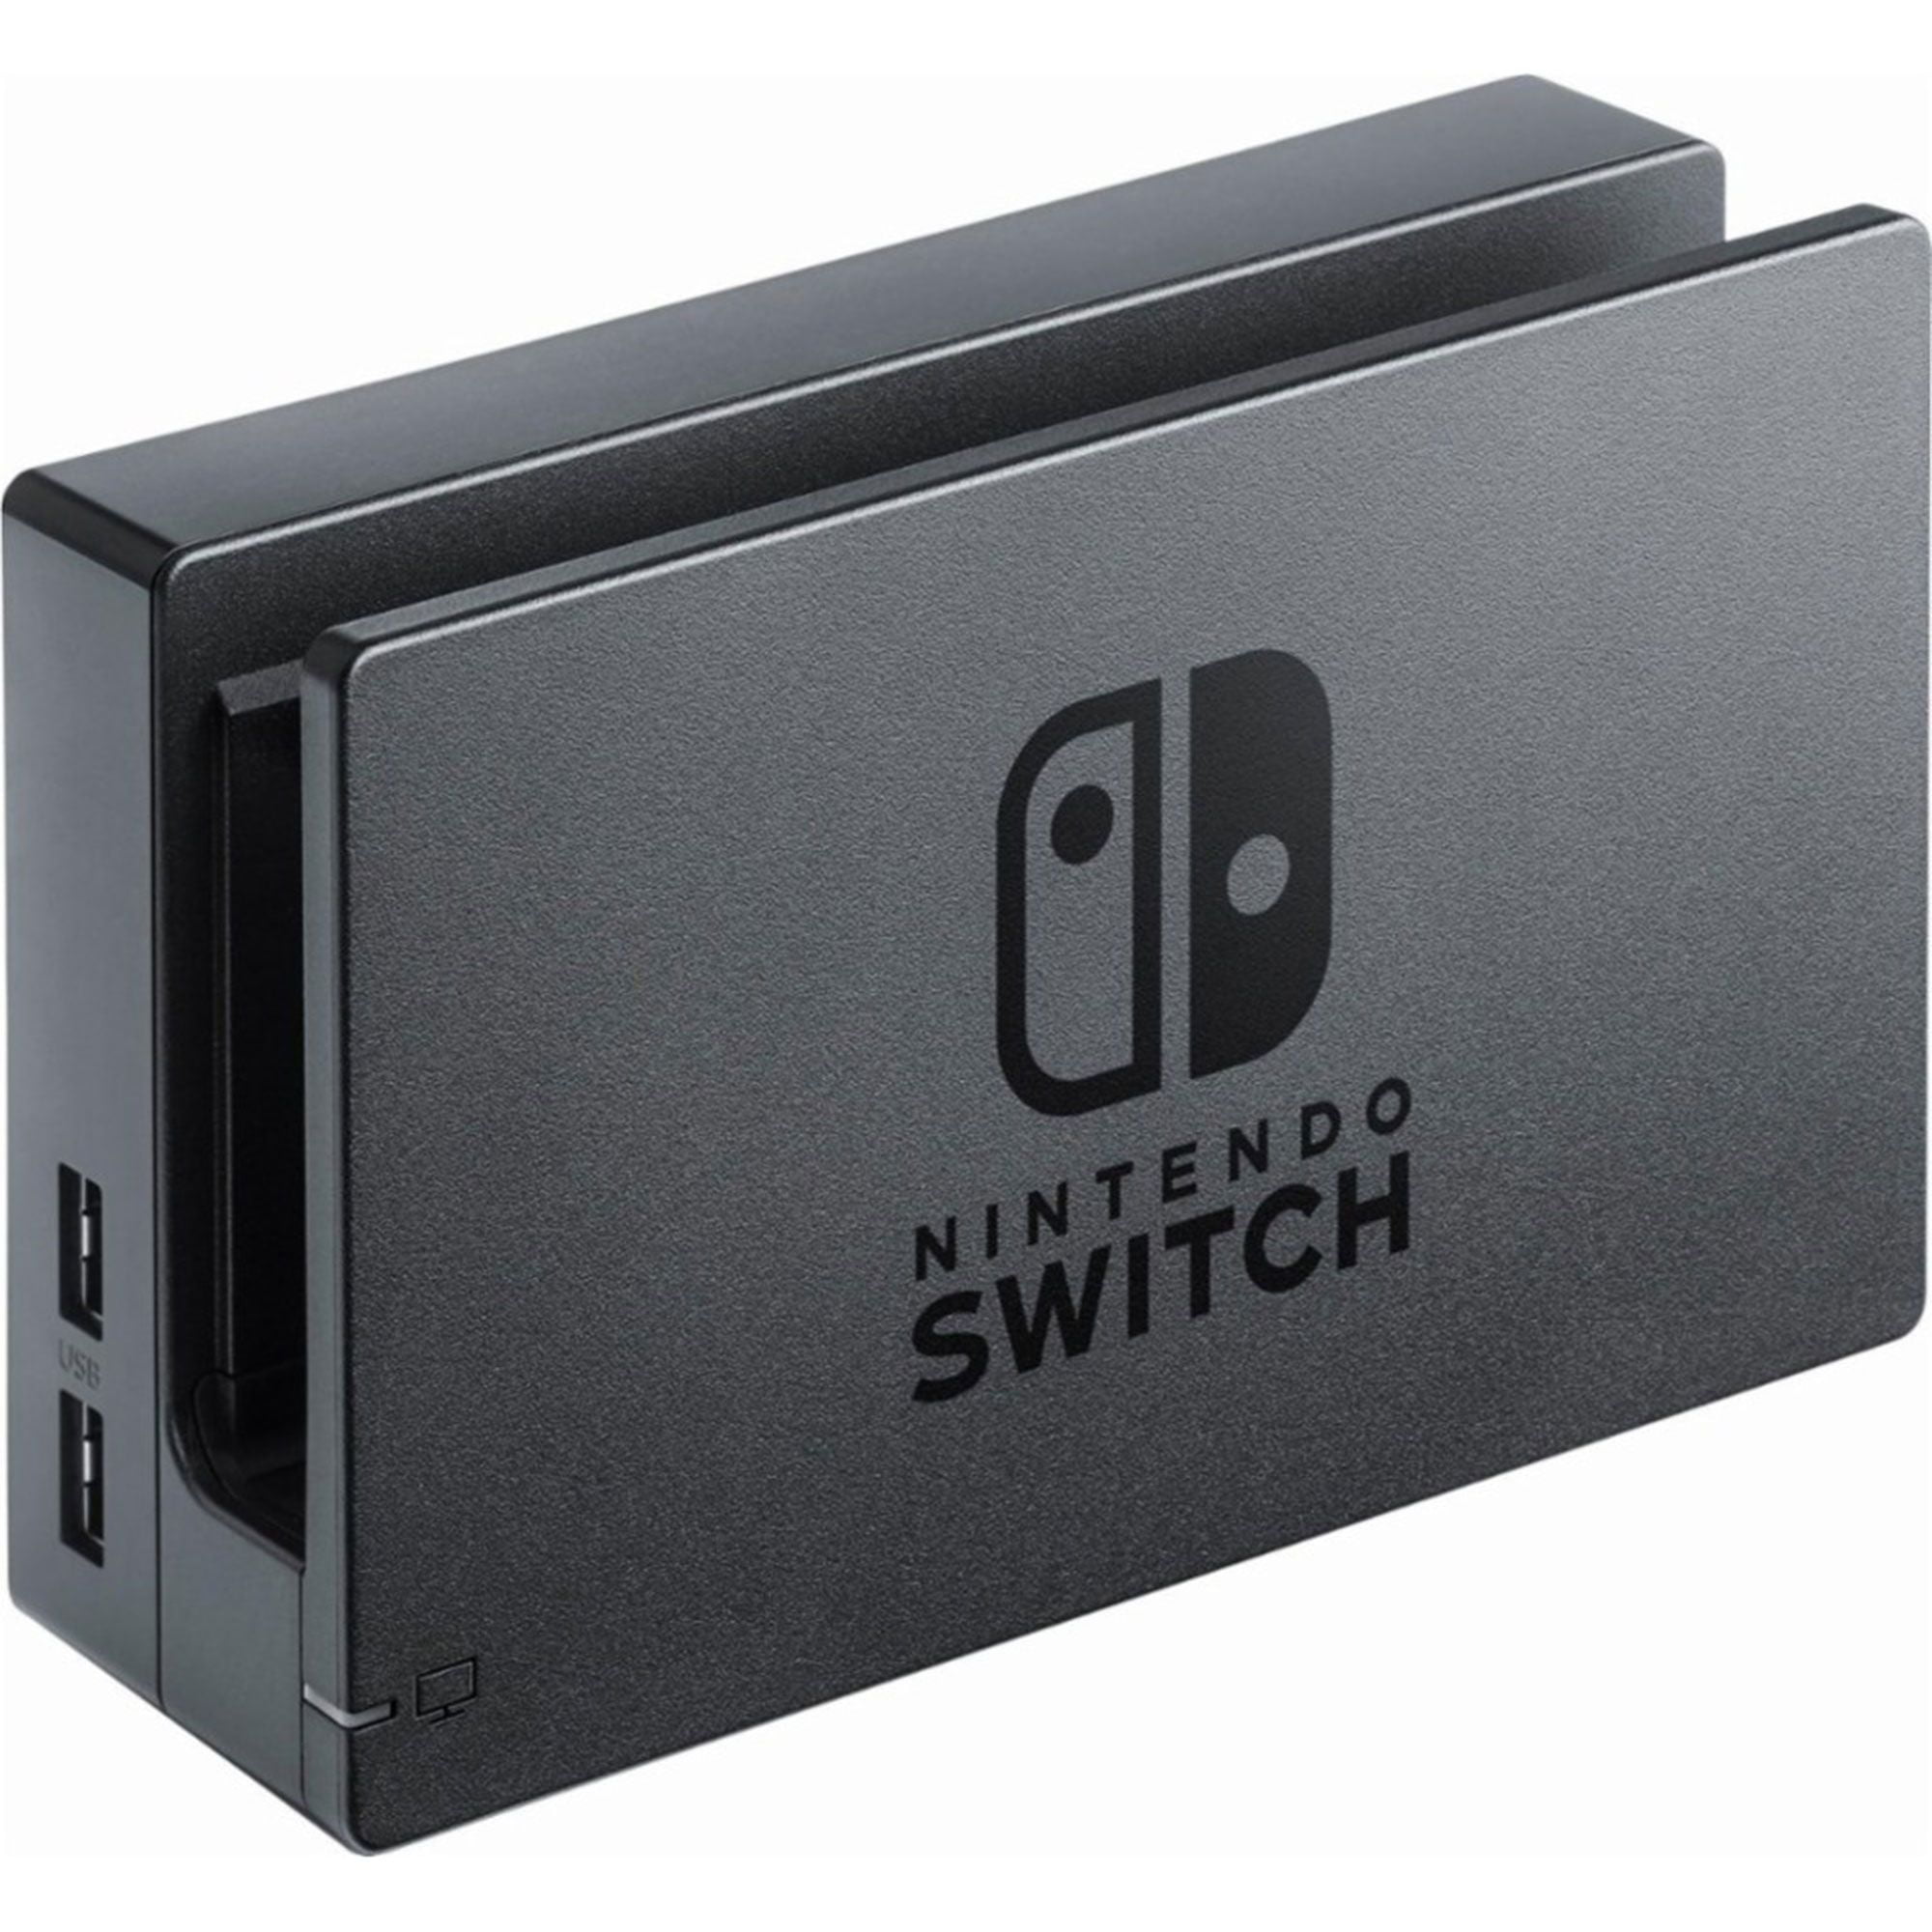 how to use dock nintendo switch